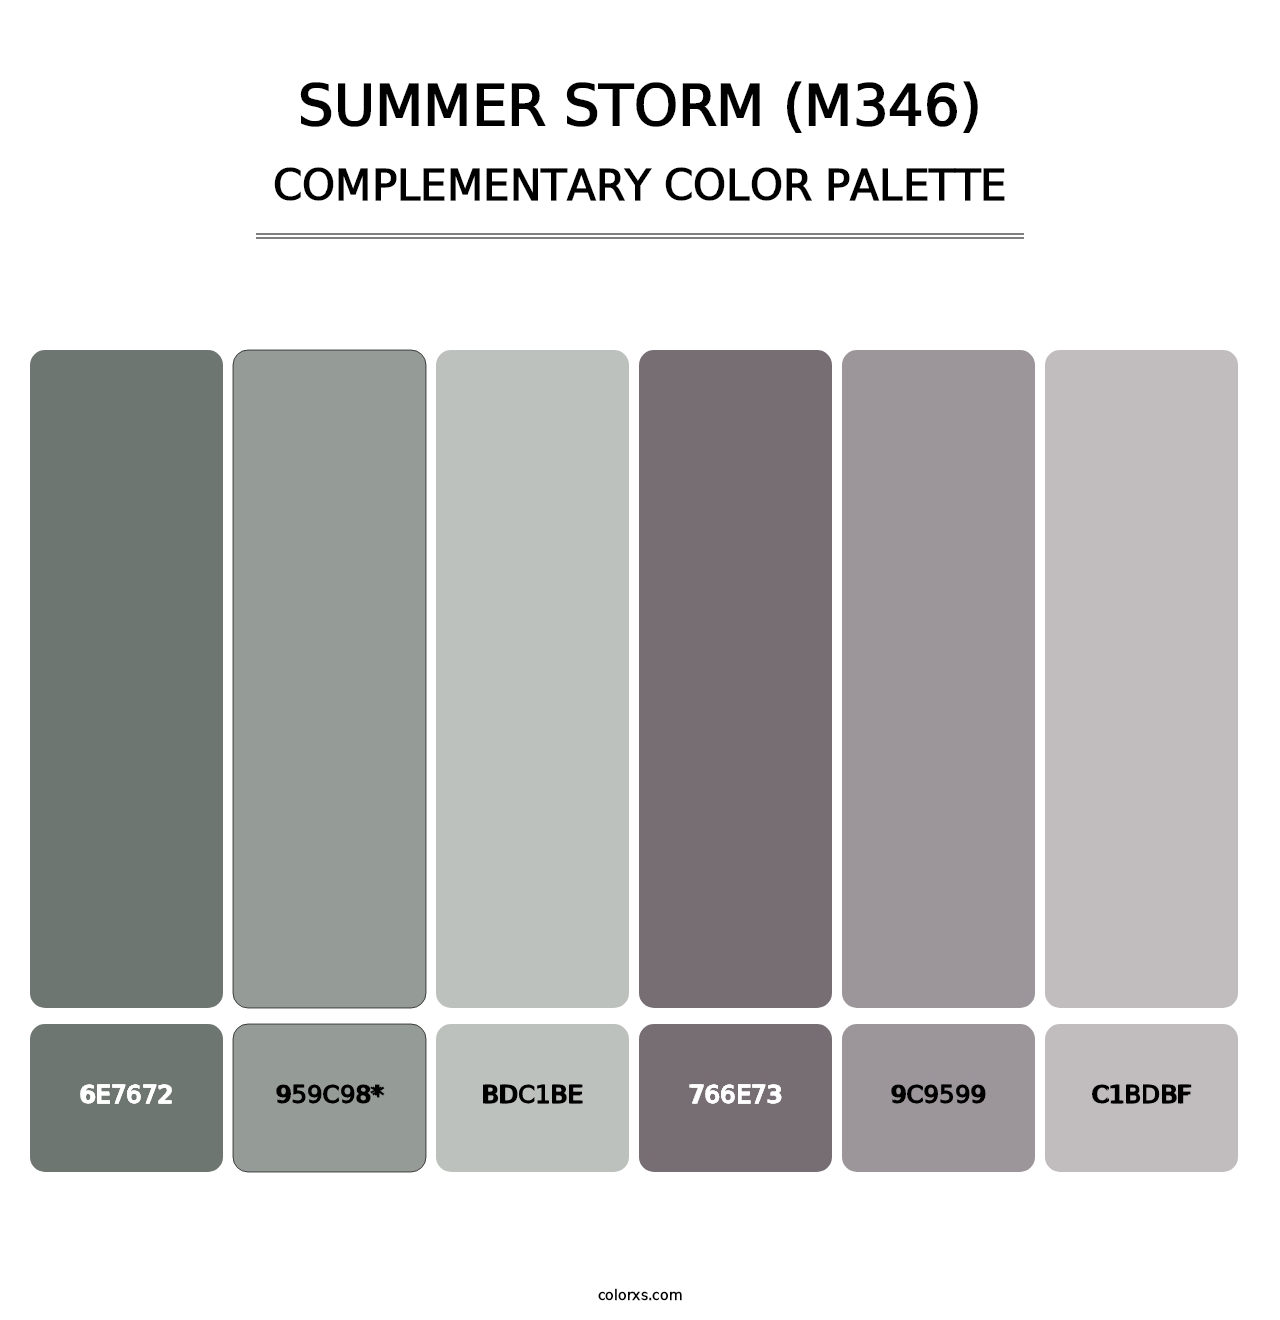 Summer Storm (M346) - Complementary Color Palette